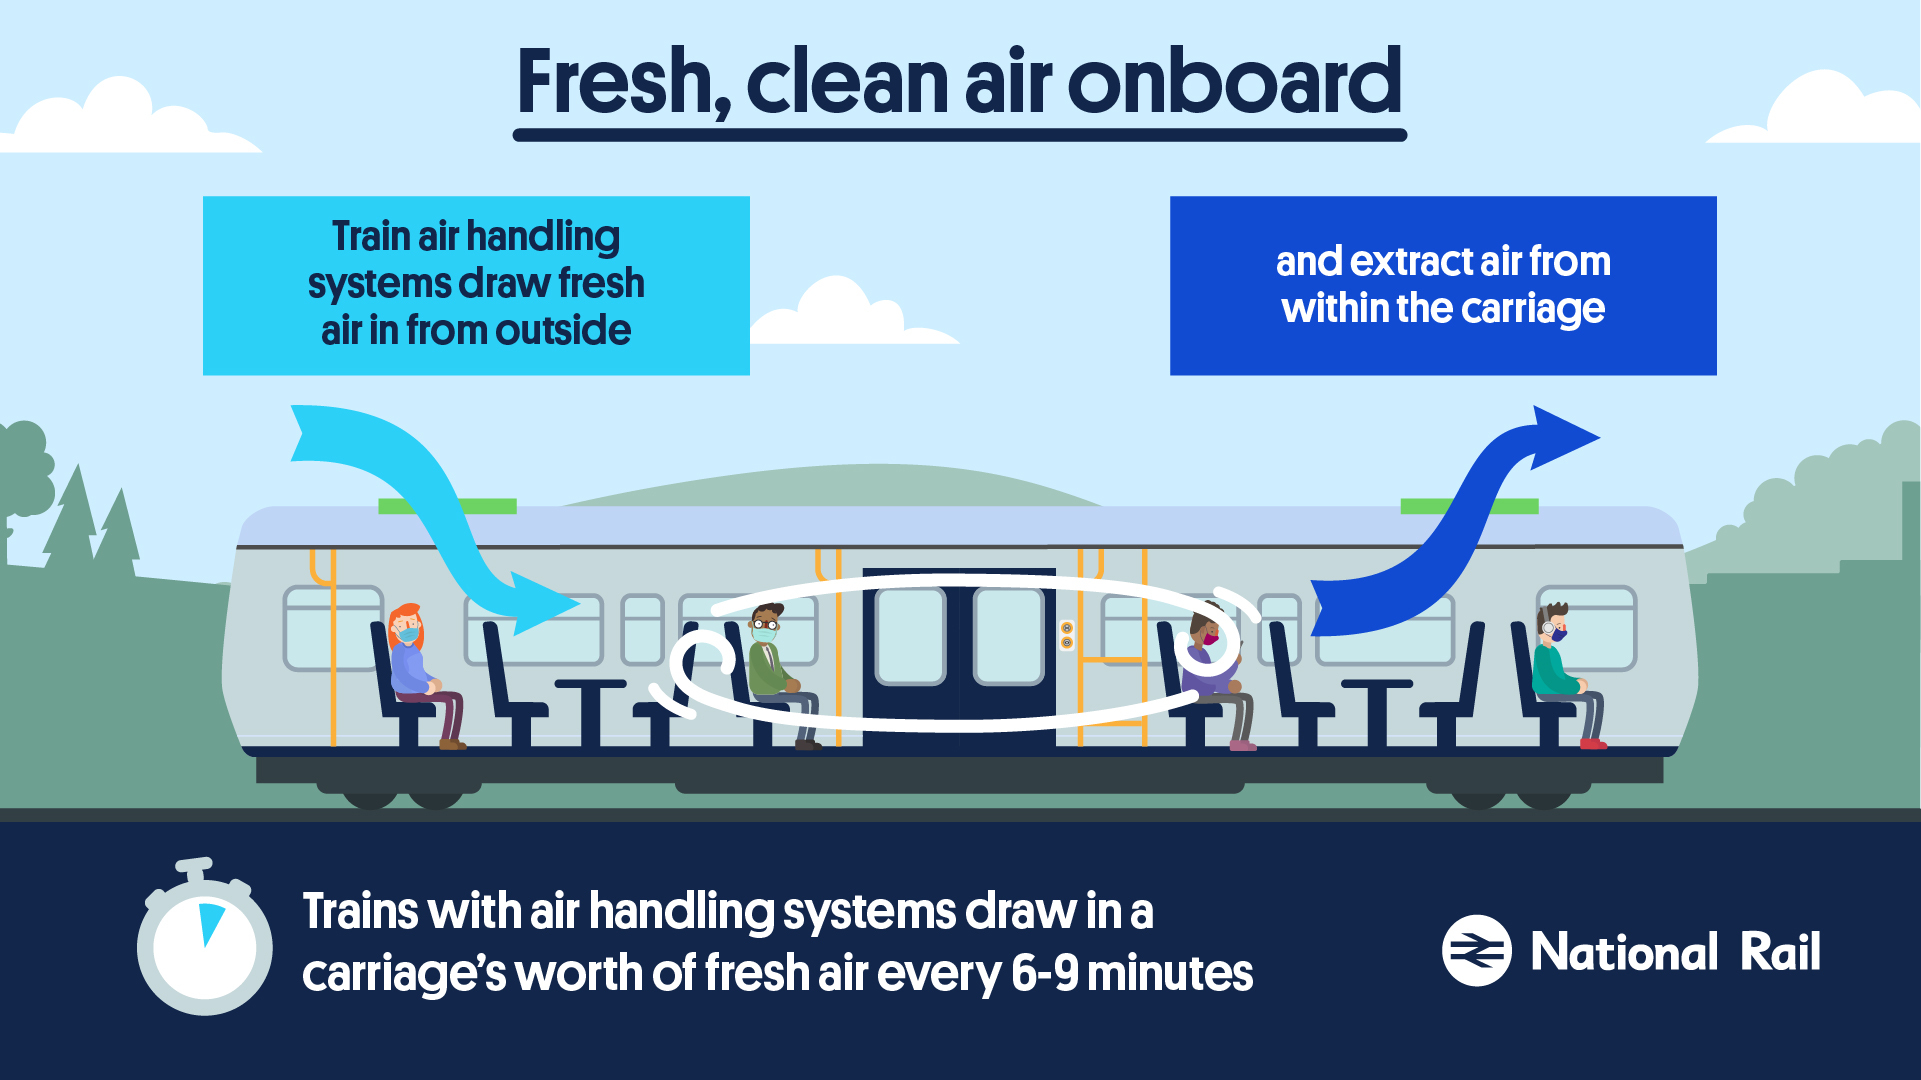 Trains with air handling systems circulate the air every 6-9 minutes.